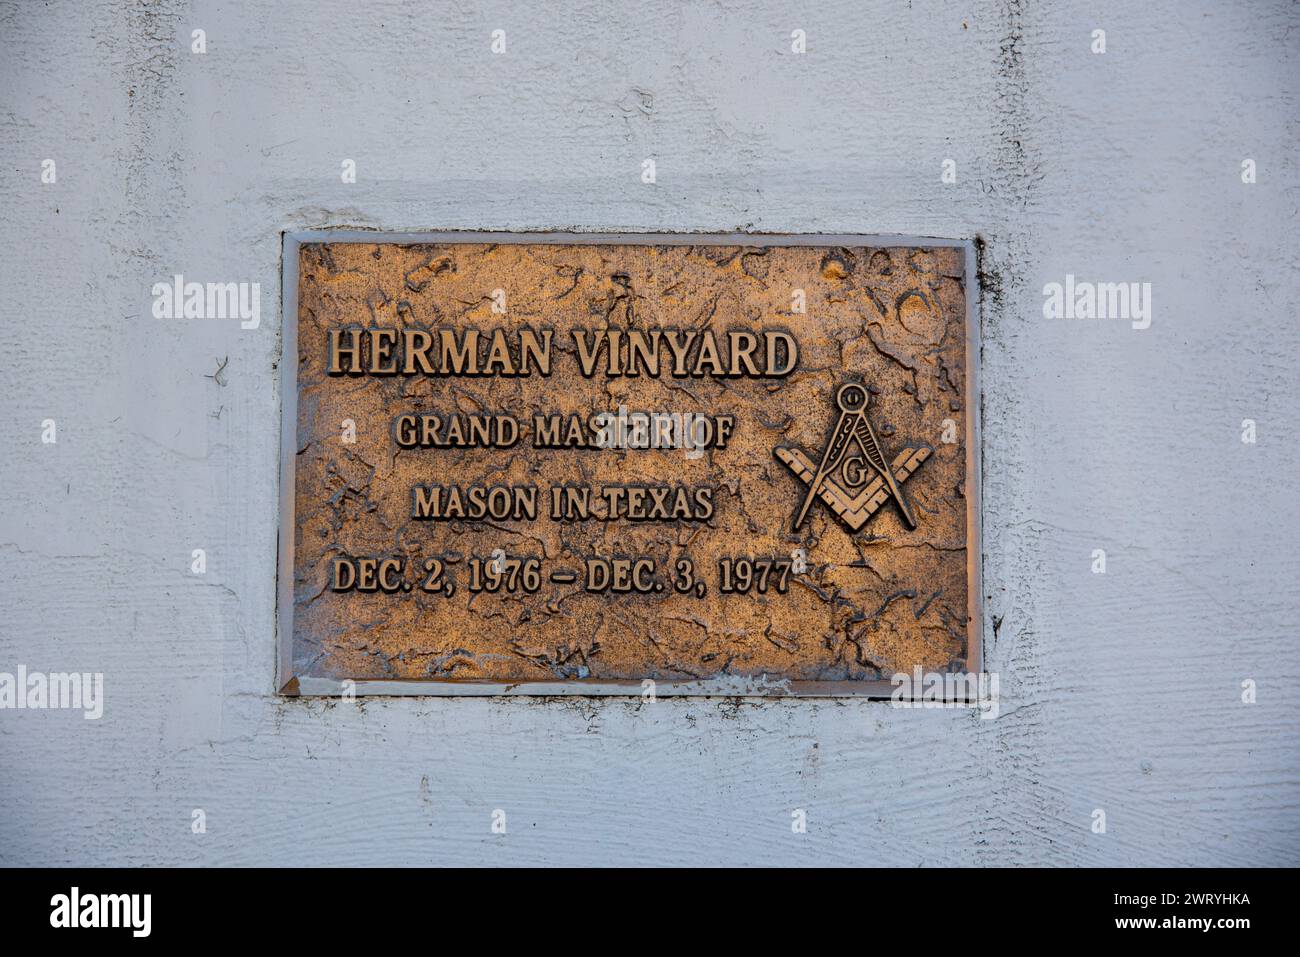 Plaque dedication for Herman Vineyard, Grand Master of Mason in Texas, with the square and compasses symbol, McAllen, Hidalgo County, Texas, USA. Stock Photo